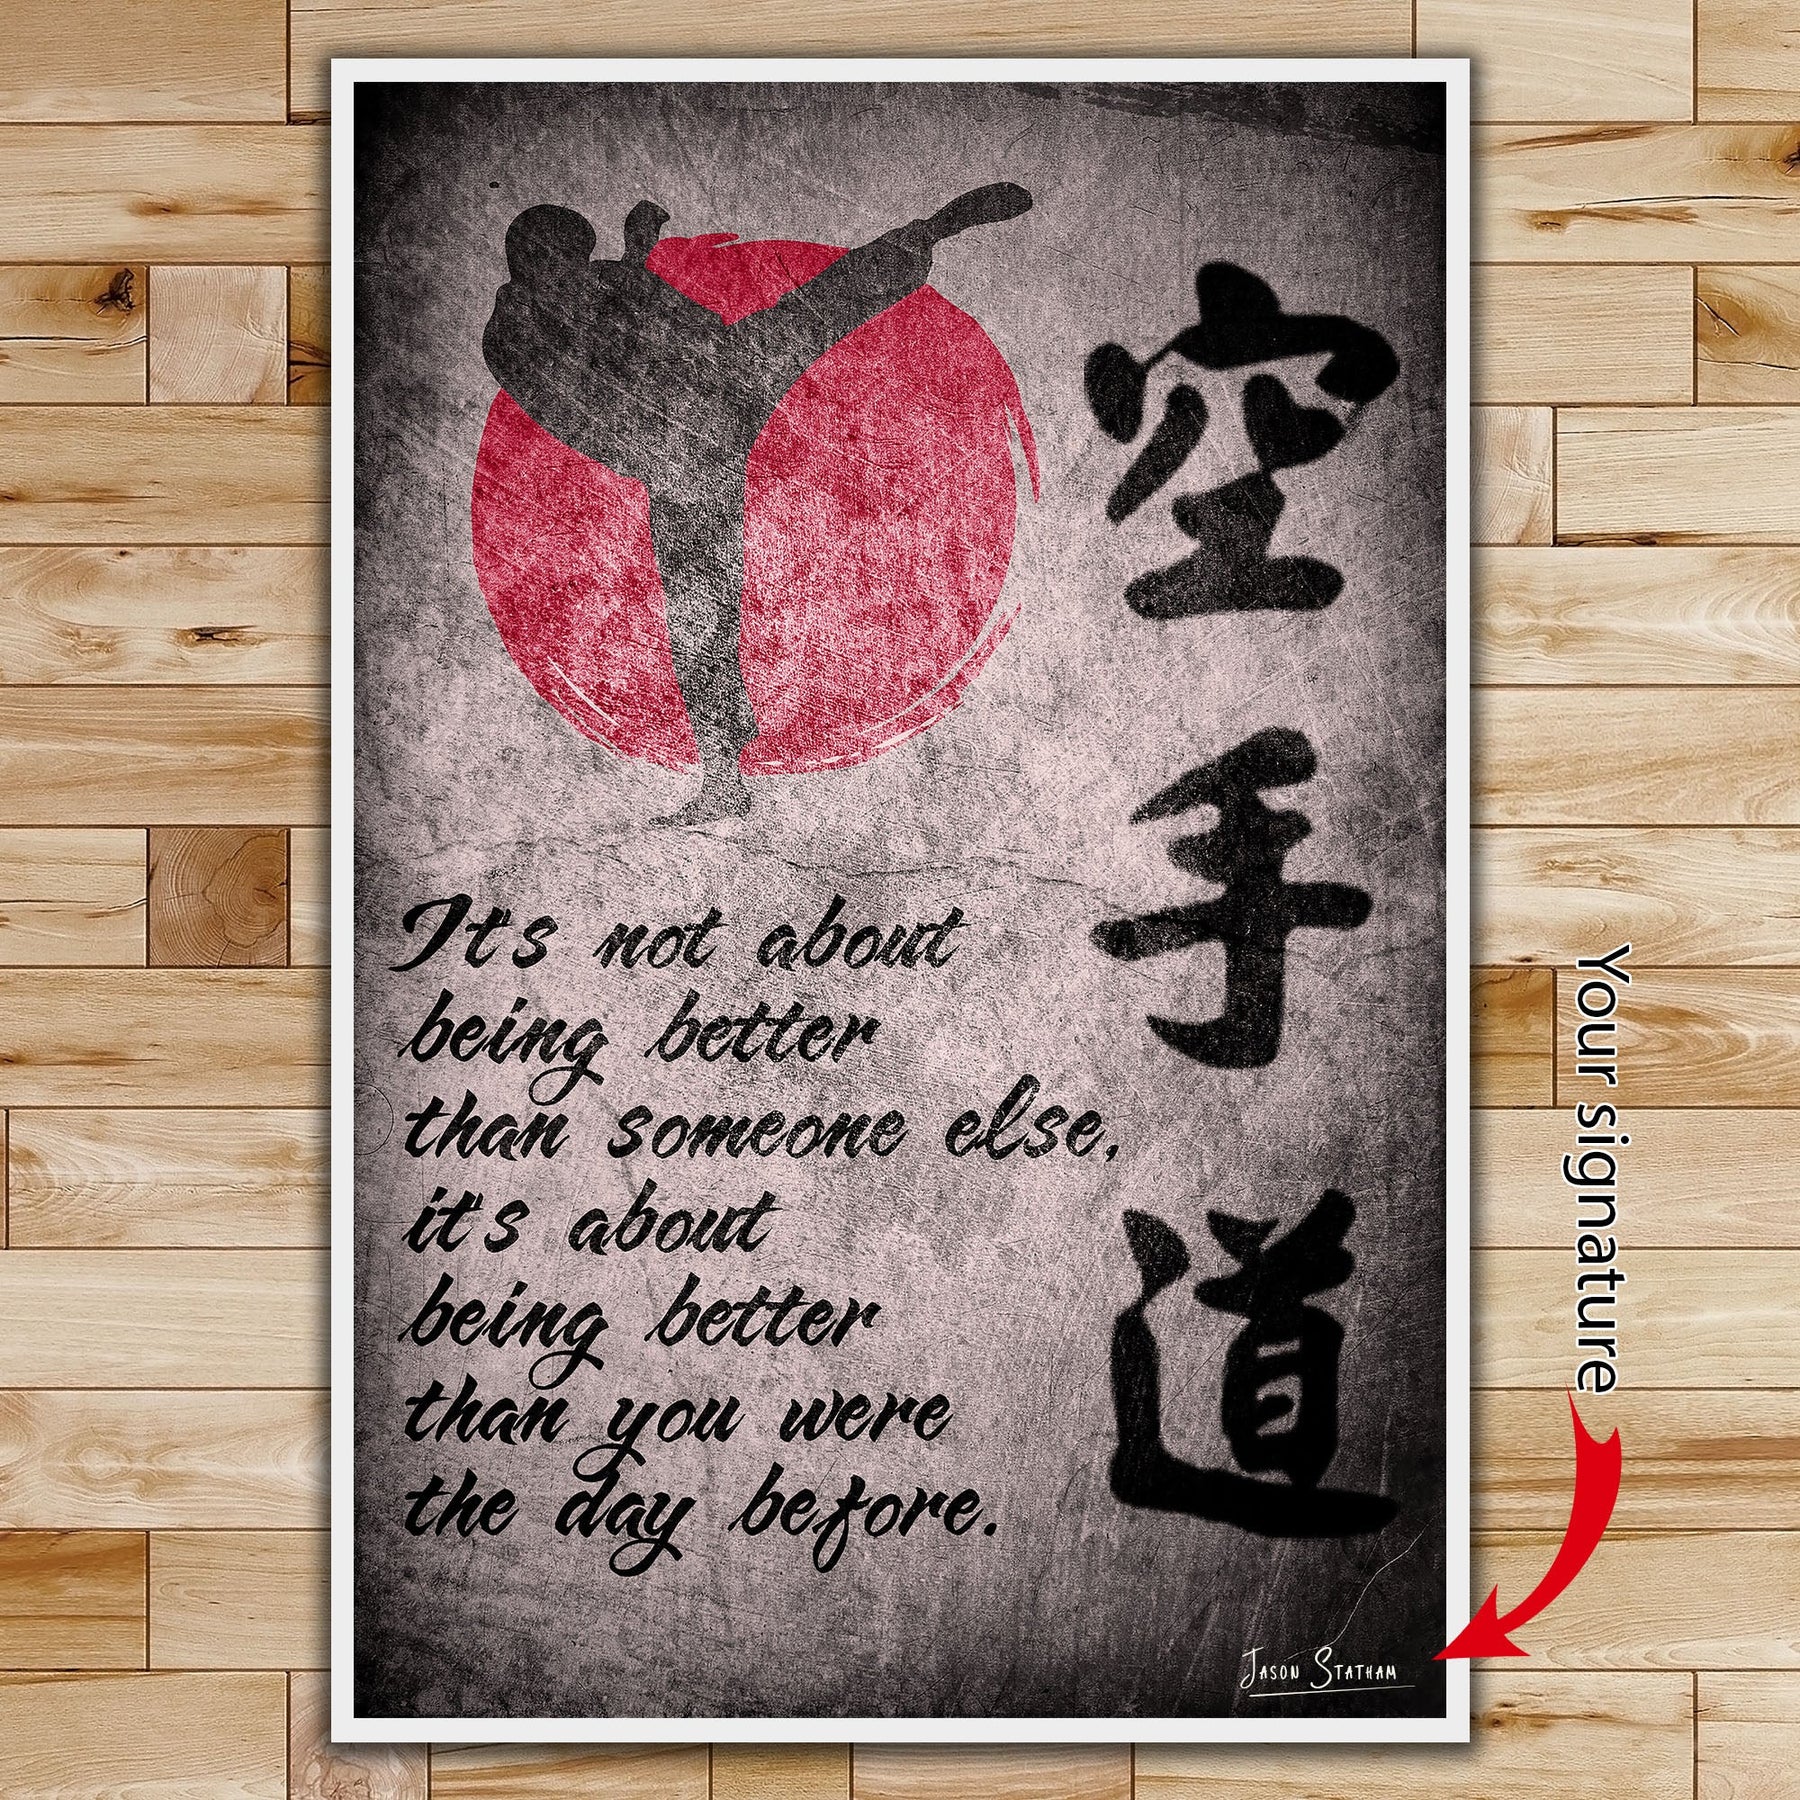 KA010 - It's About Being Better Than You Were The Day Before - Karate Kanji - Vertical Poster - Vertical Canvas - Karate Poster